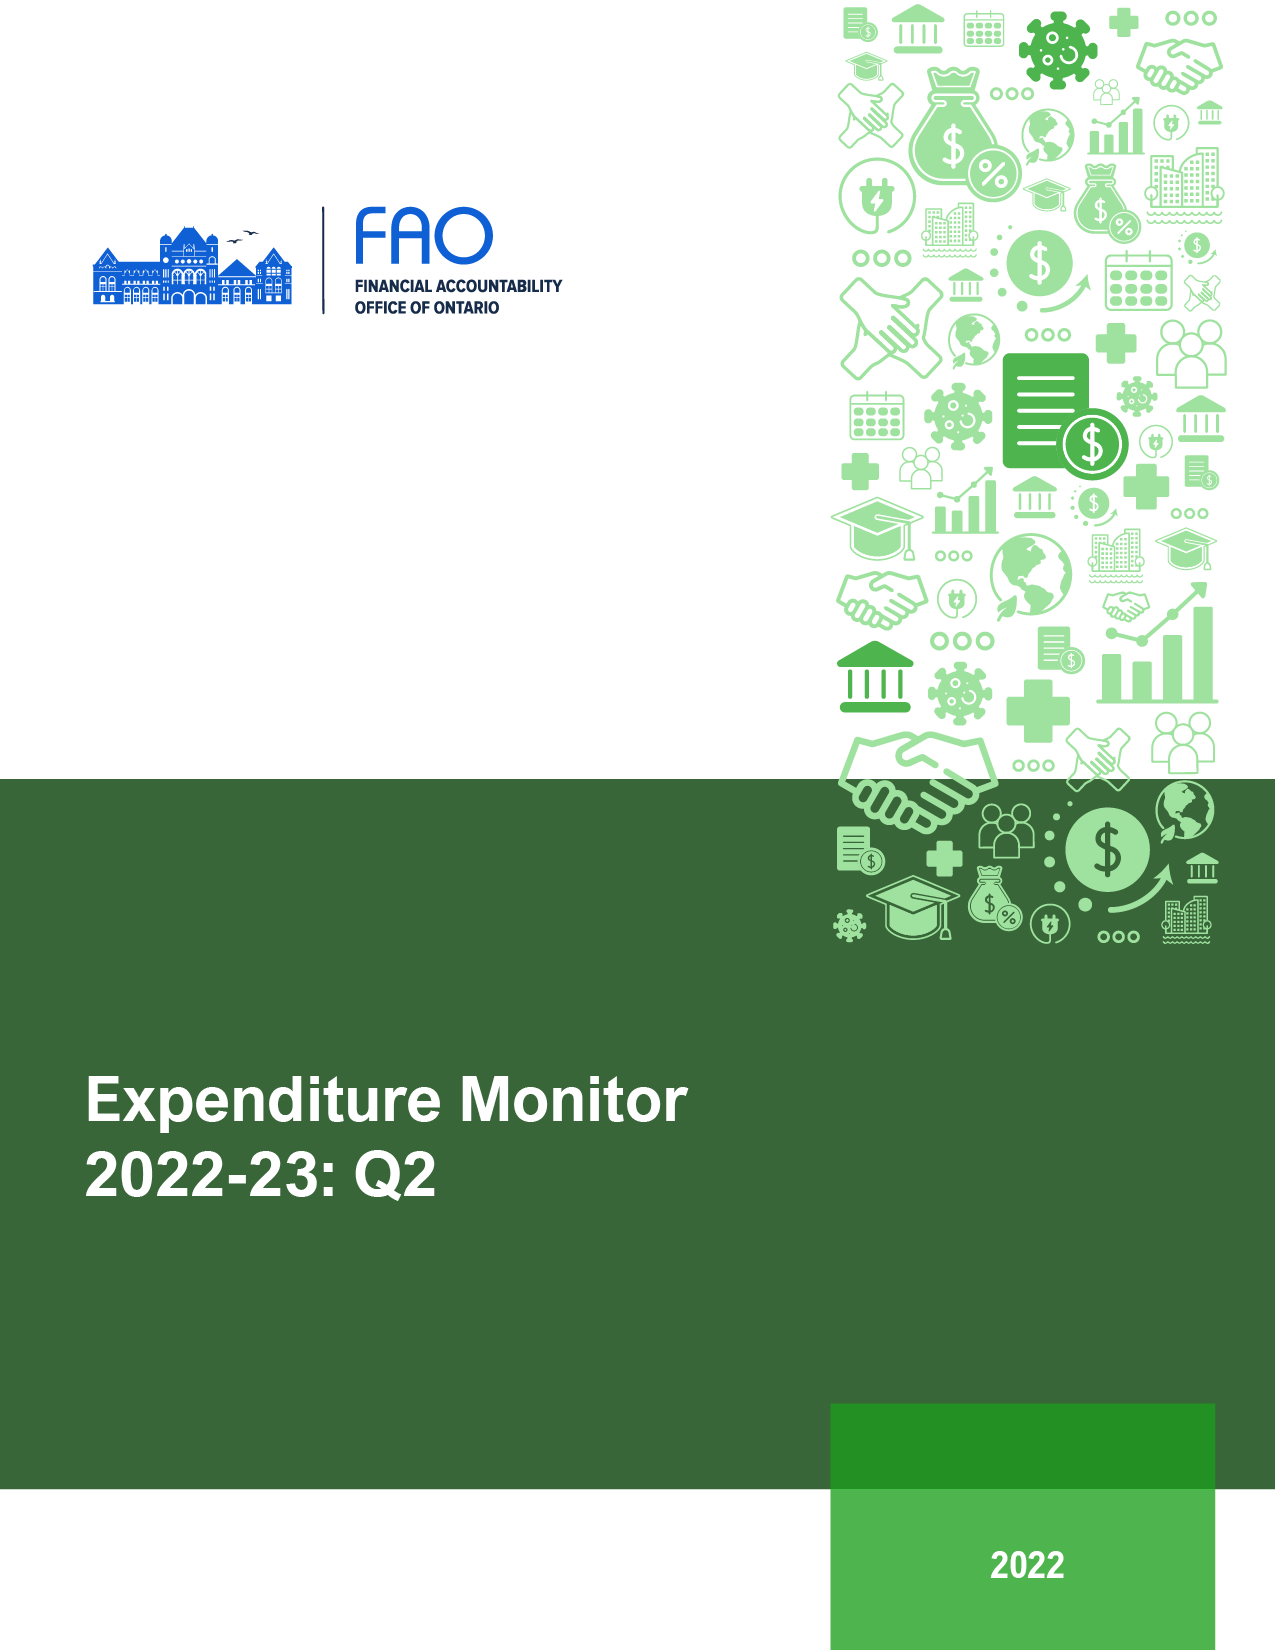 Expenditure Monitor 2022-23: Q2 report cover